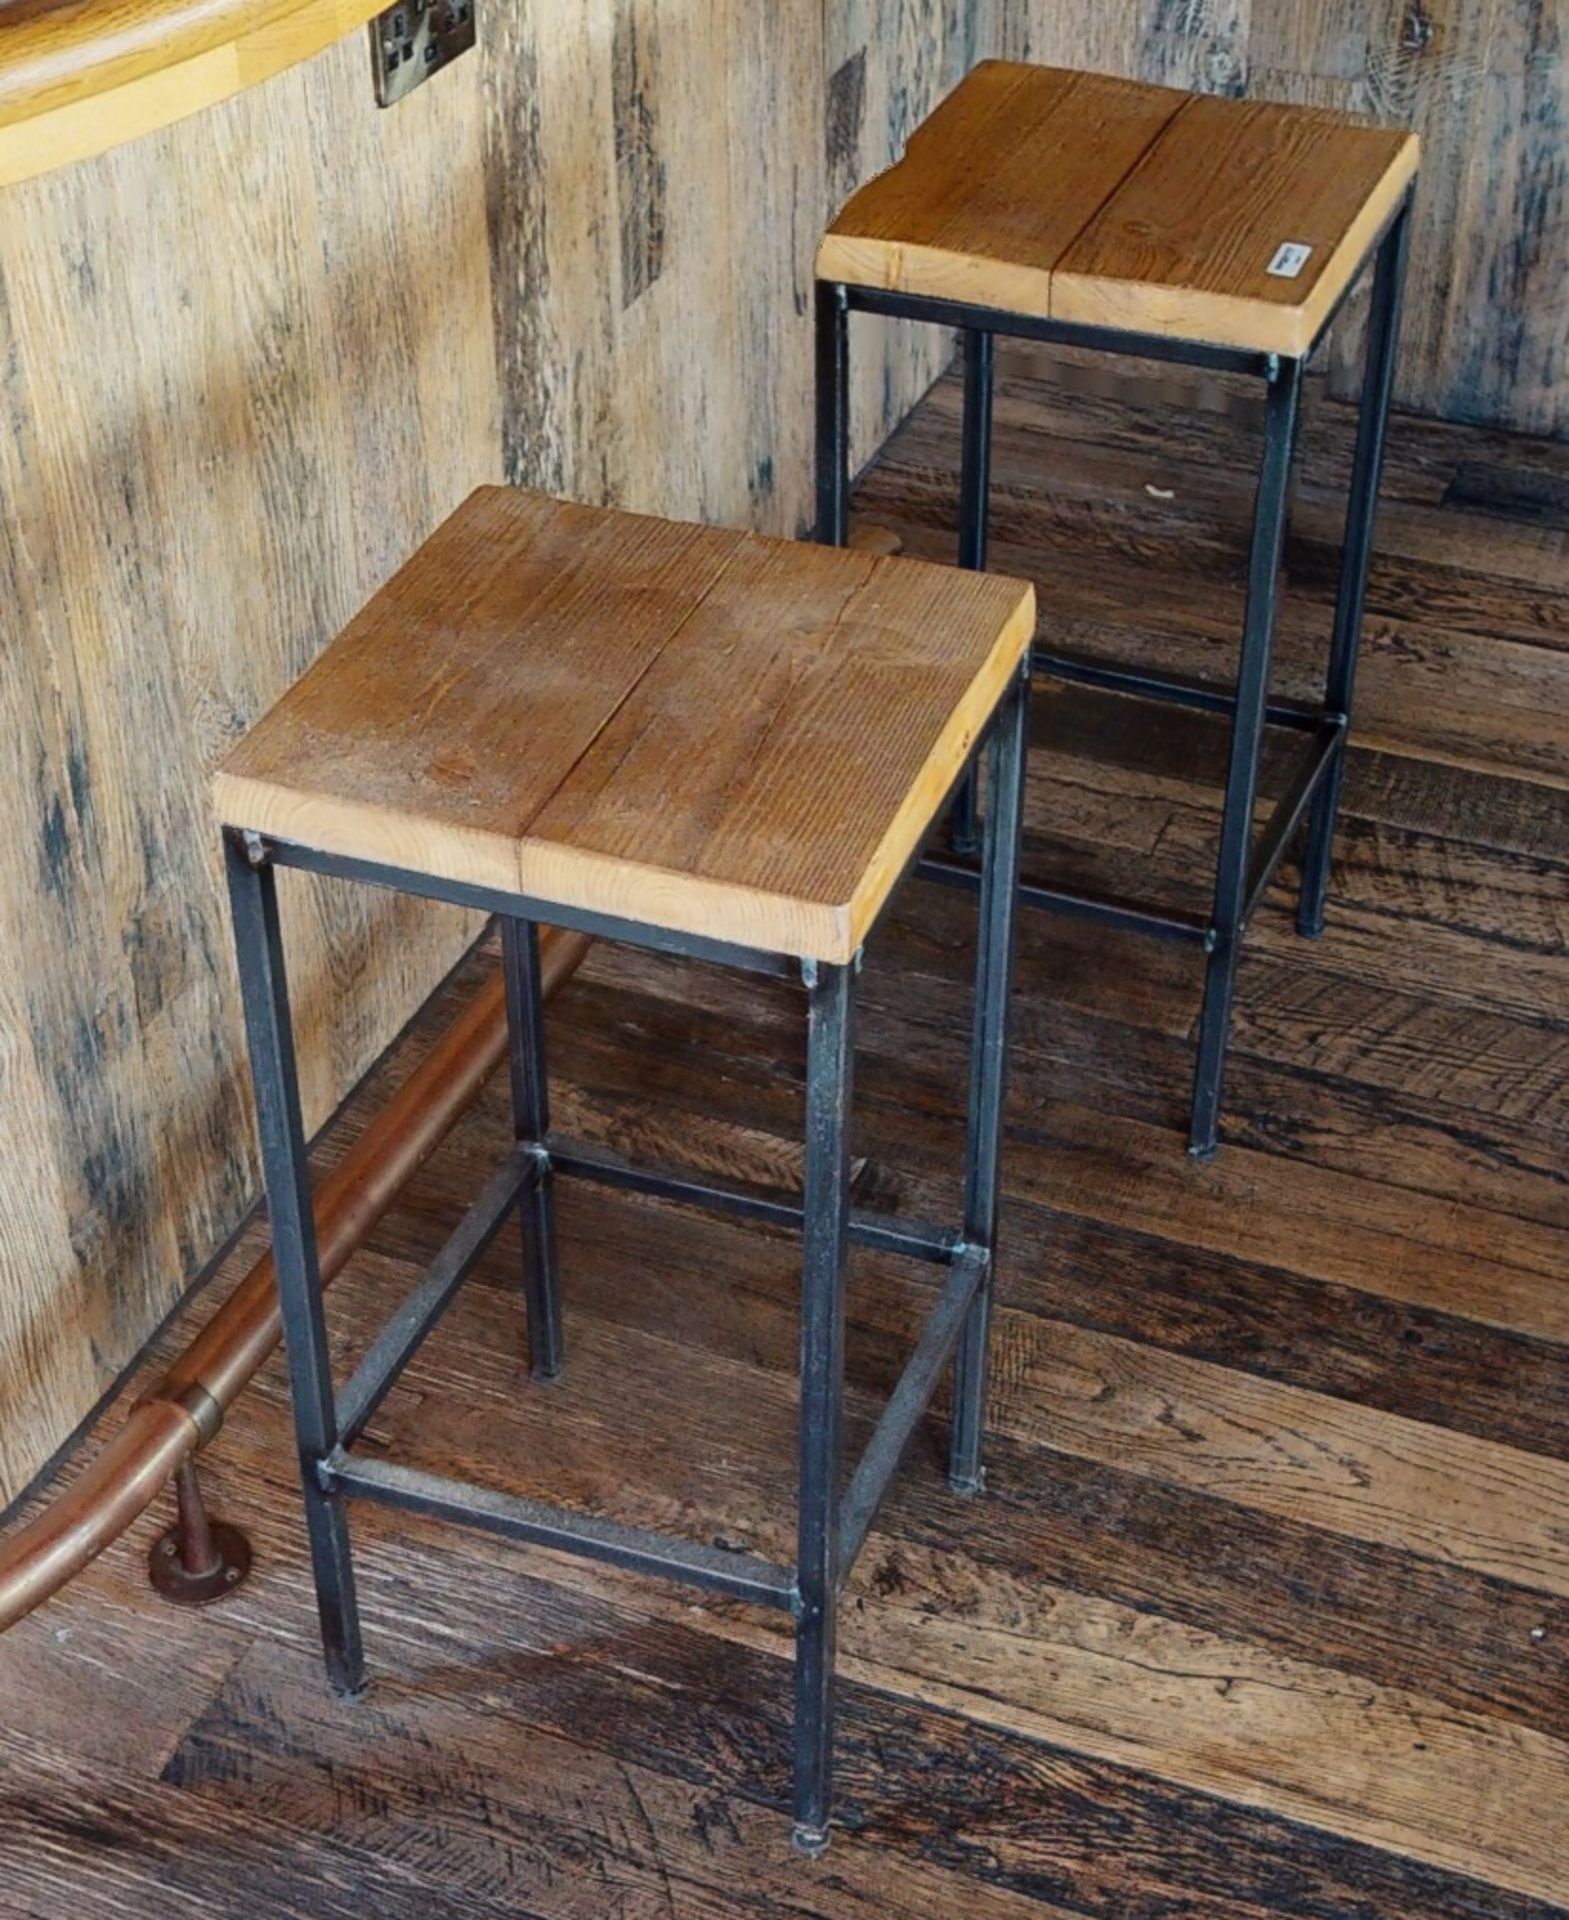 A Pair Of Wooden Topped Bar Stools - Ref: FPSD117 - CL686 - Location: Altrincham WA14This lot has - Image 2 of 2